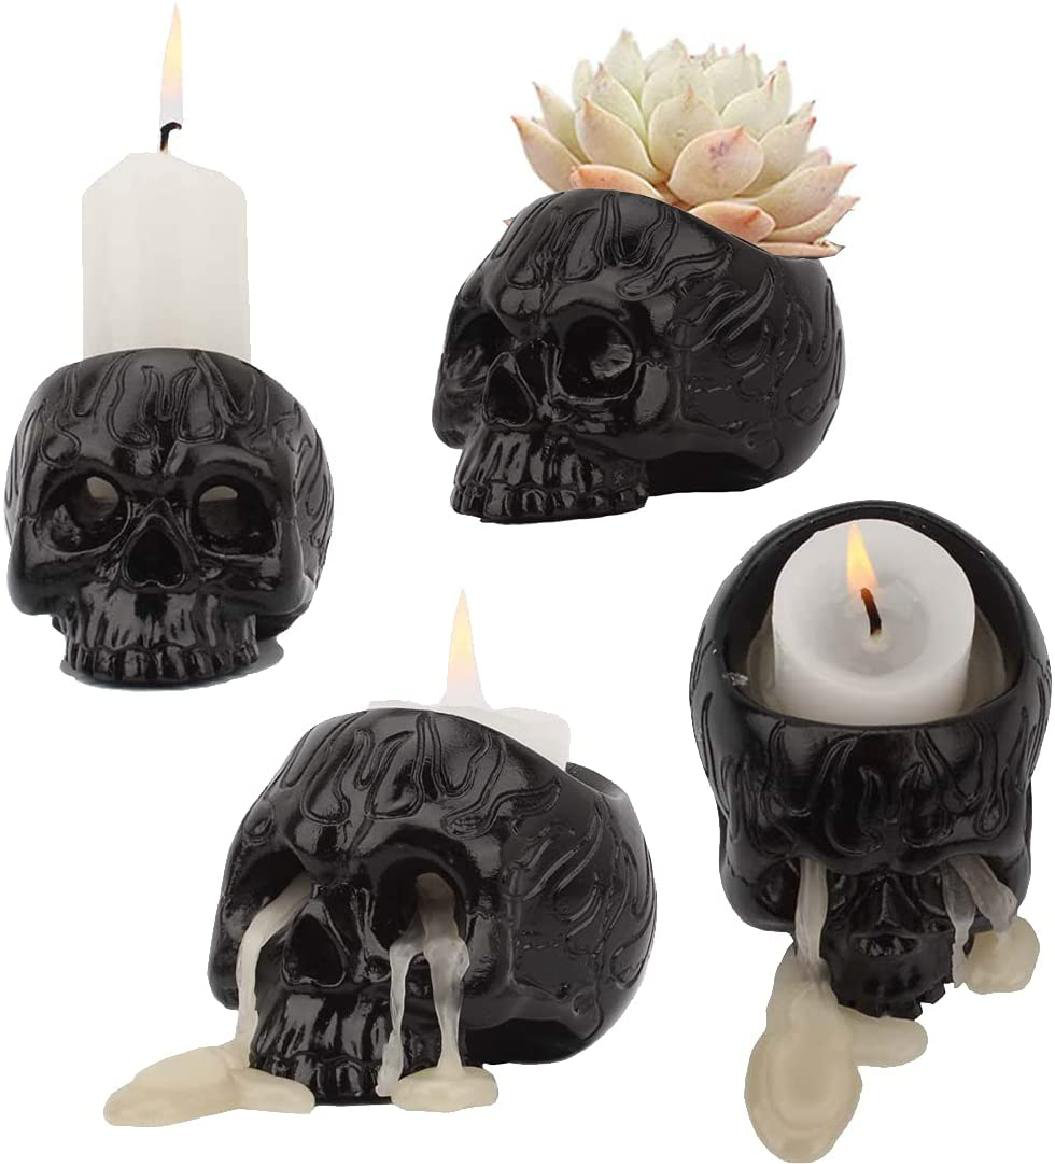 Crafted Skull Skeletal Hand Holding Stand LED Candle Lamp Light Halloween Props